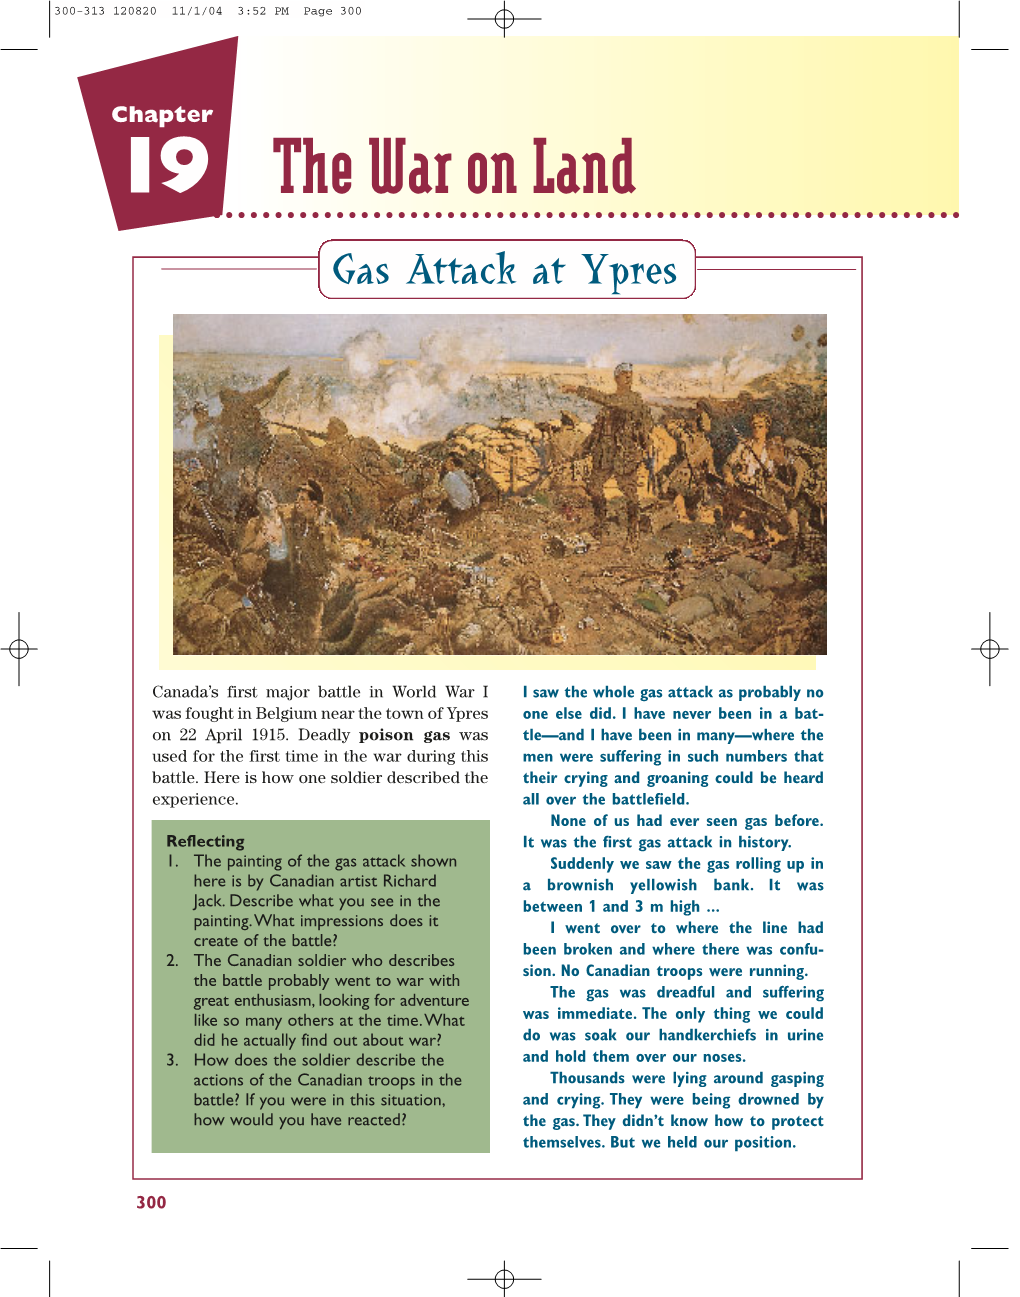 19 the War on Land Gas Attack at Ypres